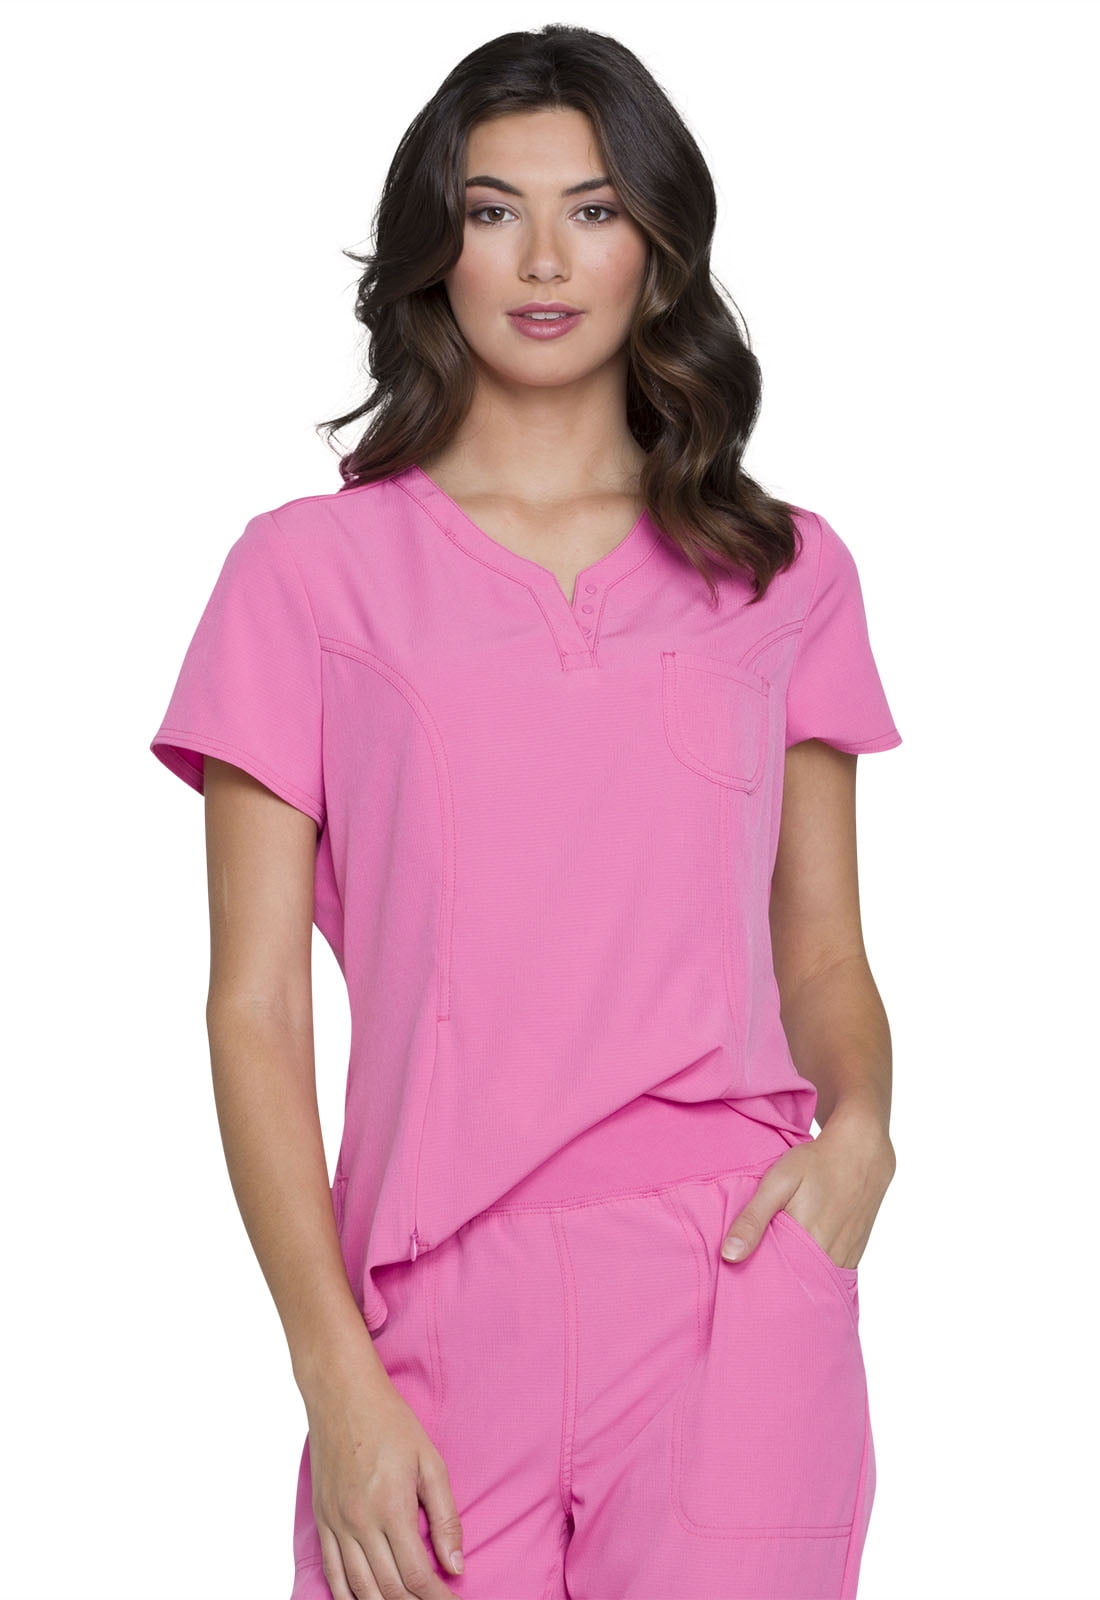 Scrubs Heartsoul Short Sleeve Scrub Top 20710 PNKH Pink Party Free Shipping 